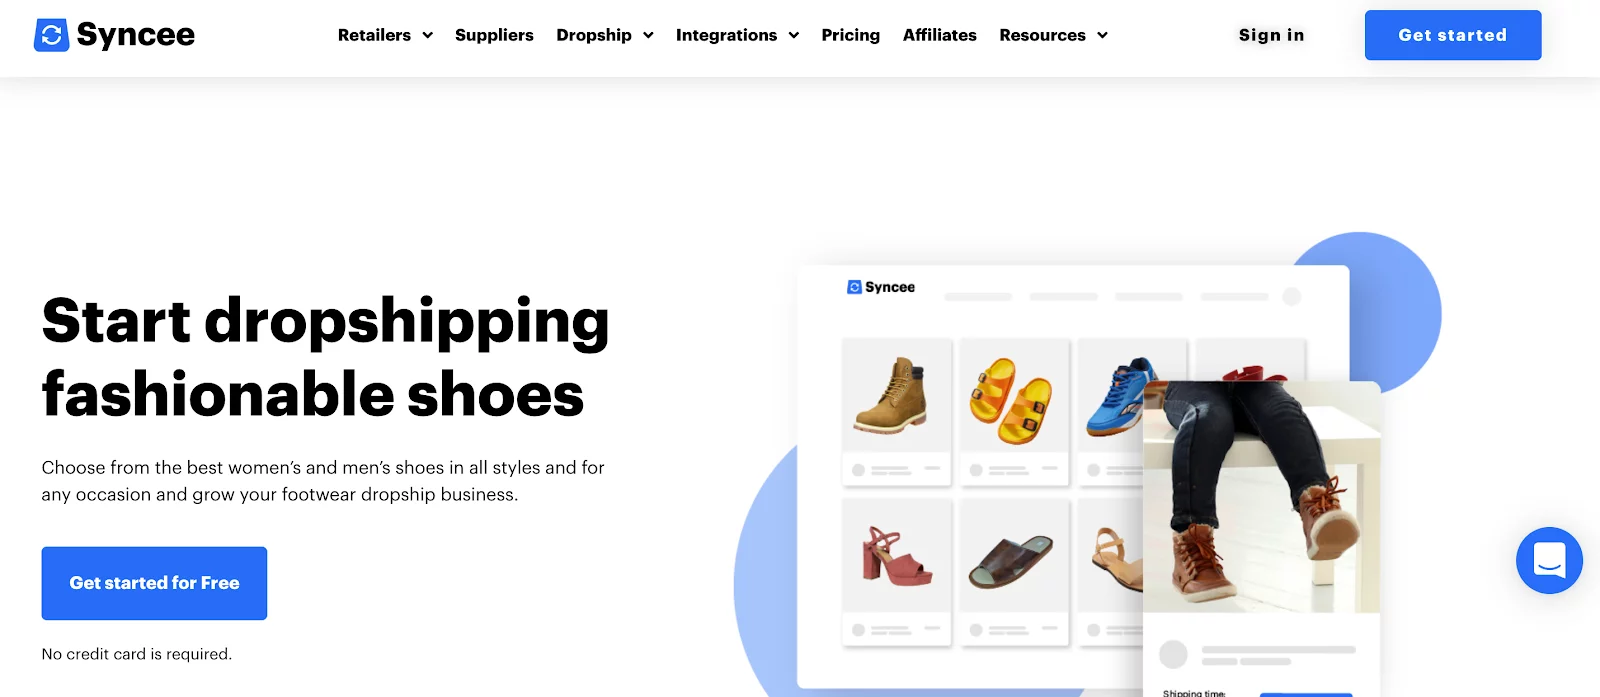 Dropshipping Shoe Suppliers - Syncee